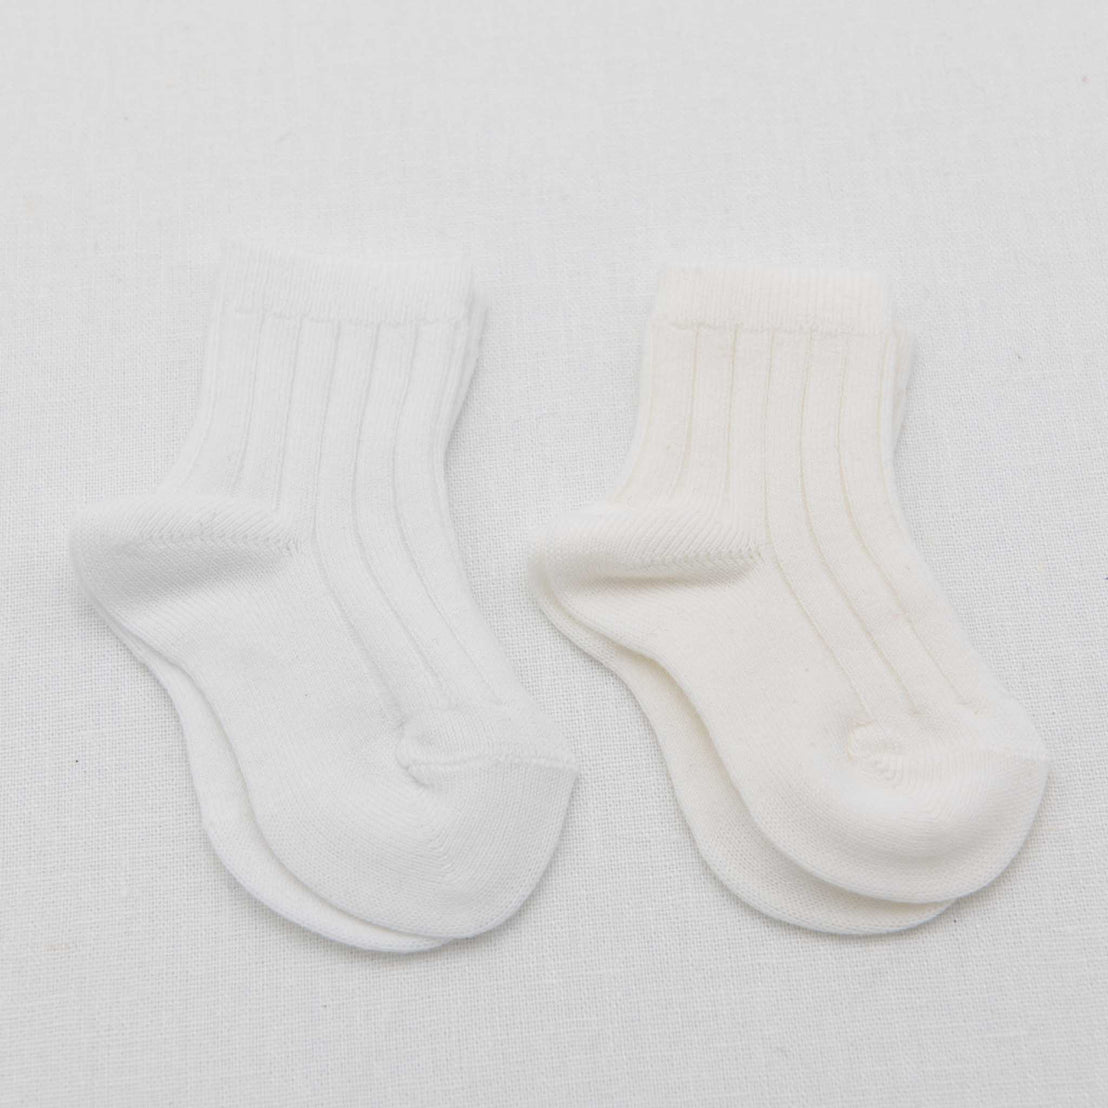 A pair of Ribbed Socks laid flat on a white background.